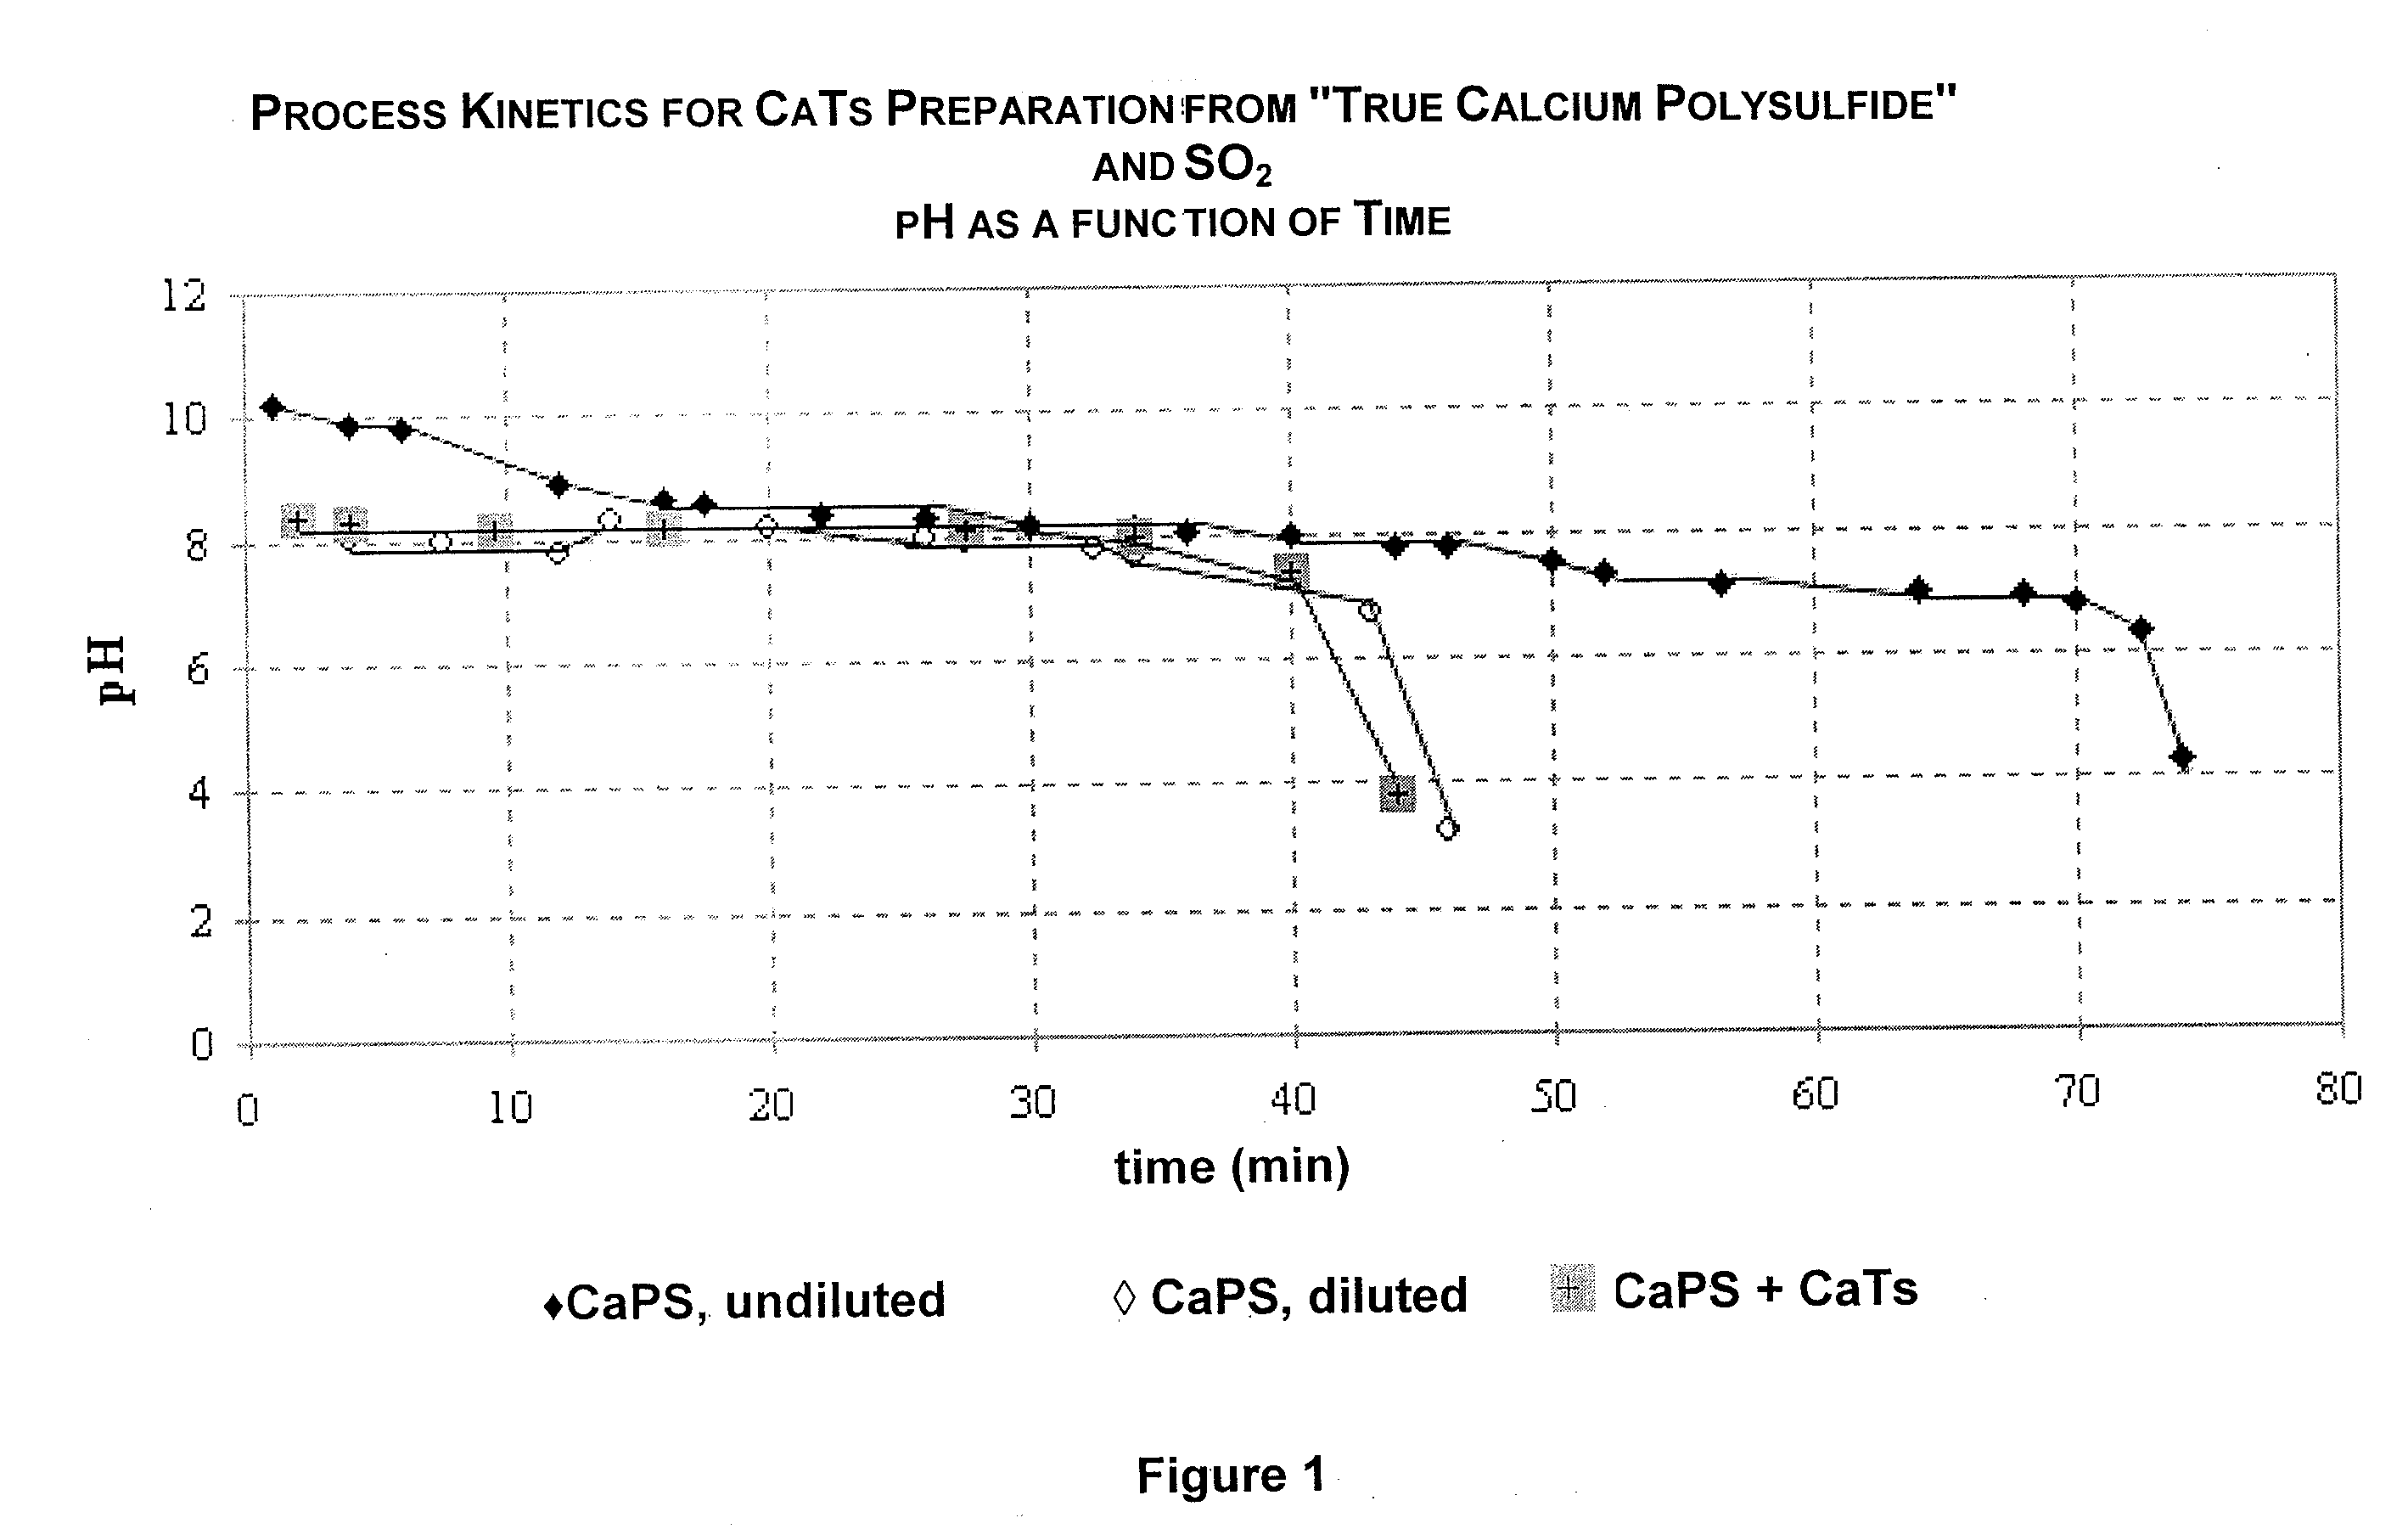 Process for preparation of calcium thiosulfate liquid solution from lime, sulfur, and sulfur dioxide